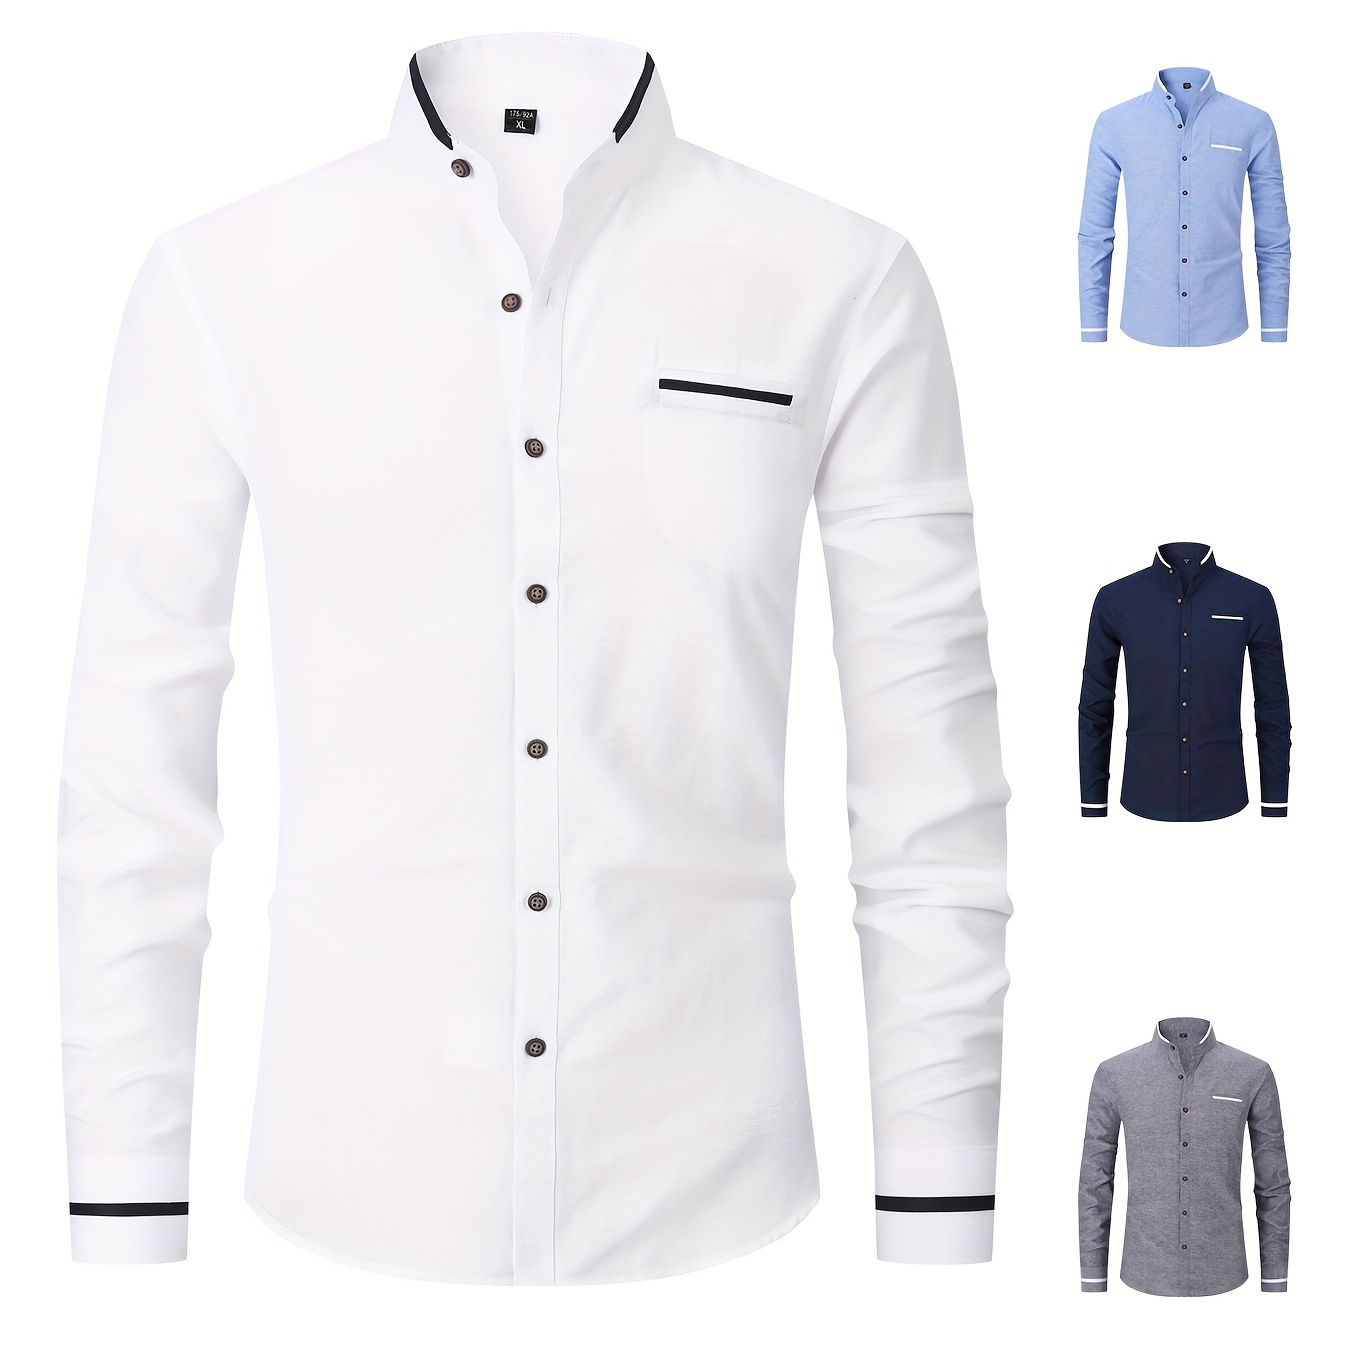 

Men's Solid Long Sleeve And Button Down Shirt With Stand Collar, Breasted Pocket And Contrast Color Stripe Pattern Collar, Pocket Edge And Cuff, Casual And Chic For Business Wear And Formal Occasions